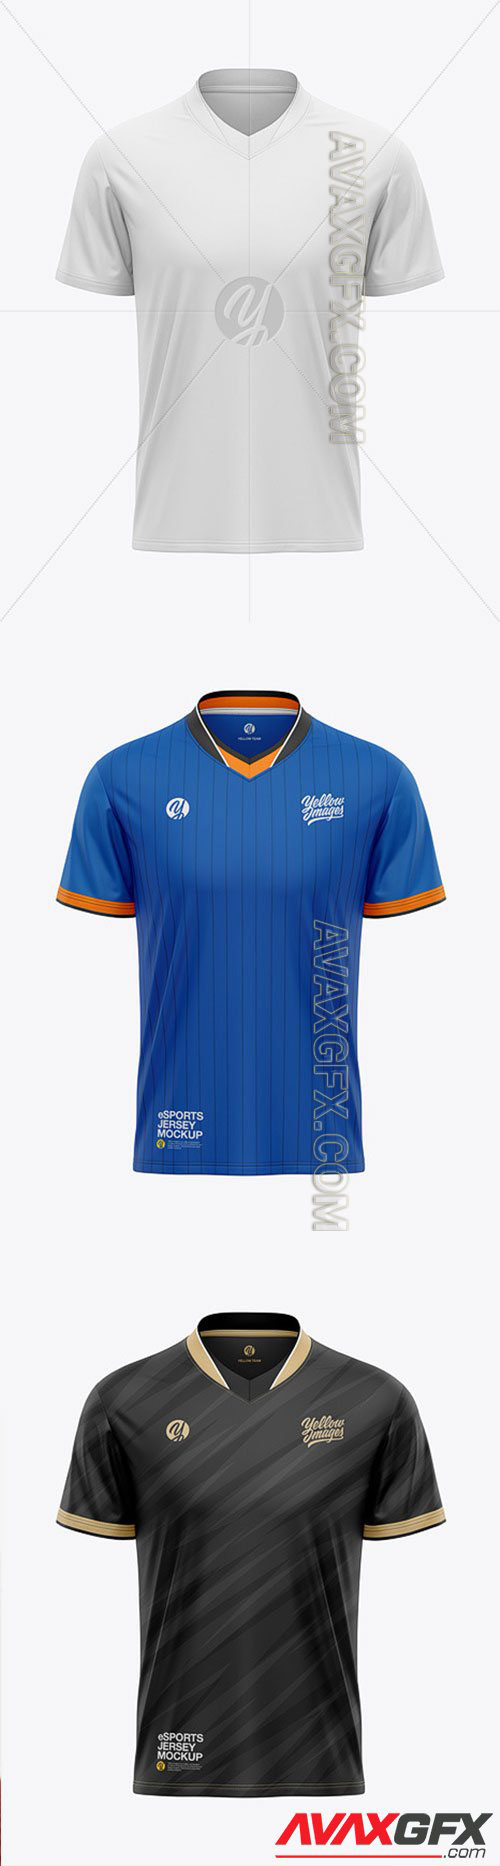 Download Men S V Neck Esports Jersey Mockup Front View 66392 Avaxgfx All Downloads That You Need In One Place Graphic From Nitroflare Rapidgator